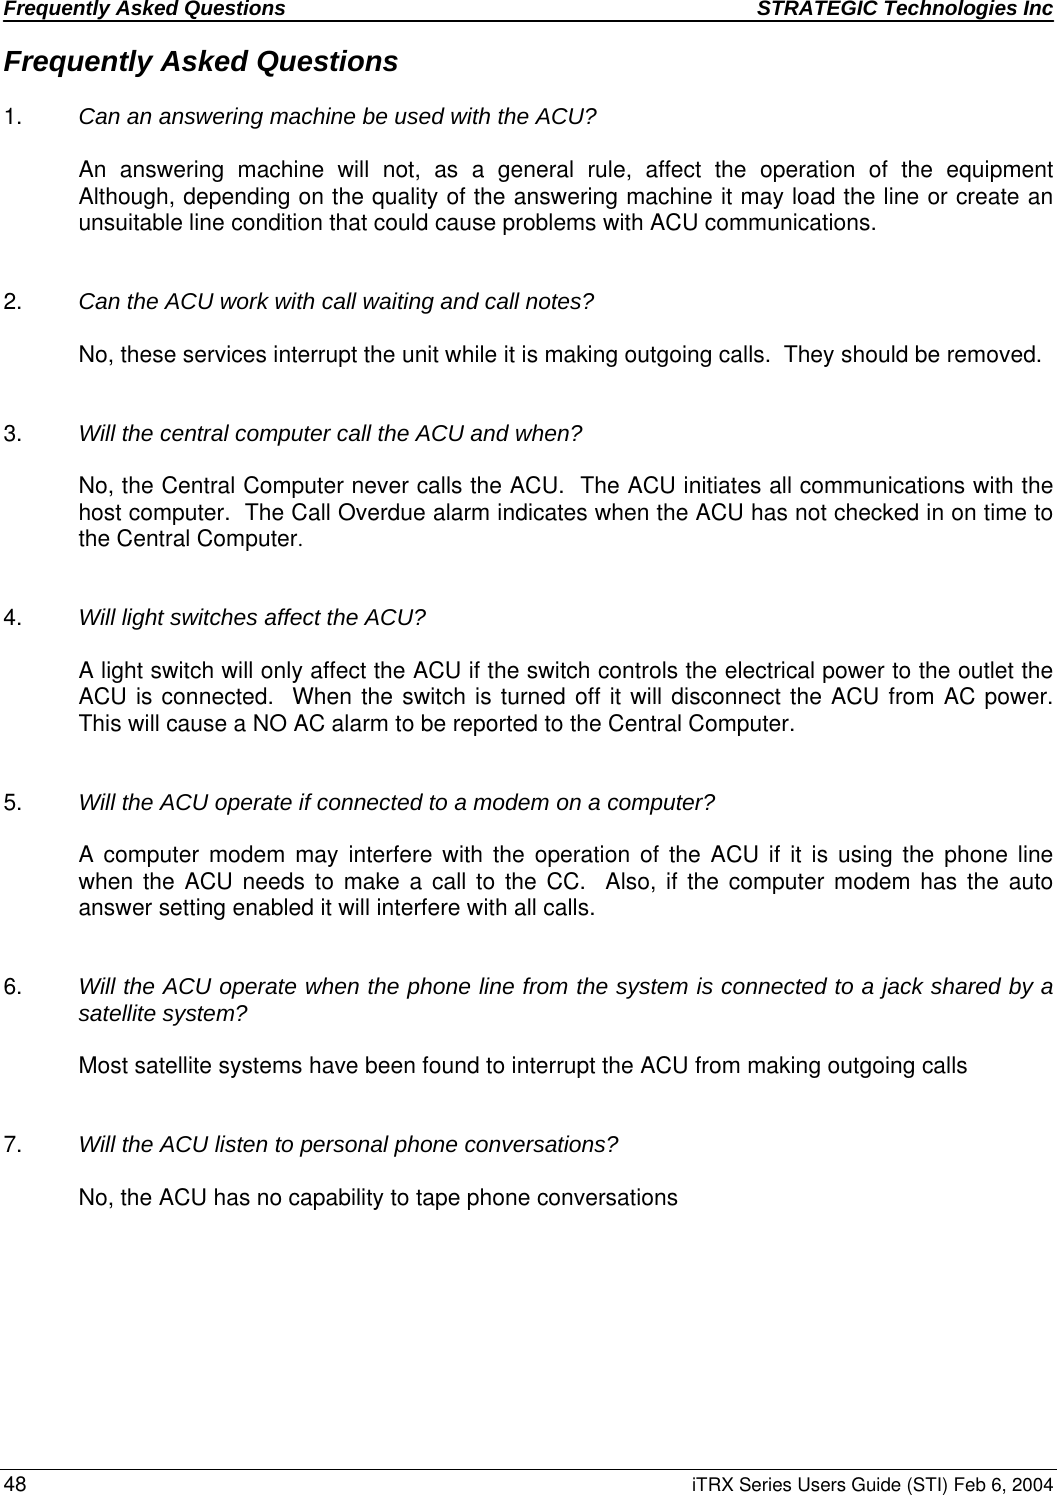 Frequently Asked Questions  STRATEGIC Technologies Inc  48 iTRX Series Users Guide (STI) Feb 6, 2004 Frequently Asked Questions  1.  Can an answering machine be used with the ACU?  An answering machine will not, as a general rule, affect the operation of the equipment  Although, depending on the quality of the answering machine it may load the line or create an unsuitable line condition that could cause problems with ACU communications.   2.   Can the ACU work with call waiting and call notes?  No, these services interrupt the unit while it is making outgoing calls.  They should be removed.   3.   Will the central computer call the ACU and when?  No, the Central Computer never calls the ACU.  The ACU initiates all communications with the host computer.  The Call Overdue alarm indicates when the ACU has not checked in on time to the Central Computer.   4.  Will light switches affect the ACU?  A light switch will only affect the ACU if the switch controls the electrical power to the outlet the ACU is connected.  When the switch is turned off it will disconnect the ACU from AC power.  This will cause a NO AC alarm to be reported to the Central Computer.   5.  Will the ACU operate if connected to a modem on a computer?  A computer modem may interfere with the operation of the ACU if it is using the phone line when the ACU needs to make a call to the CC.  Also, if the computer modem has the auto answer setting enabled it will interfere with all calls.   6.  Will the ACU operate when the phone line from the system is connected to a jack shared by a satellite system?  Most satellite systems have been found to interrupt the ACU from making outgoing calls   7.  Will the ACU listen to personal phone conversations?     No, the ACU has no capability to tape phone conversations 